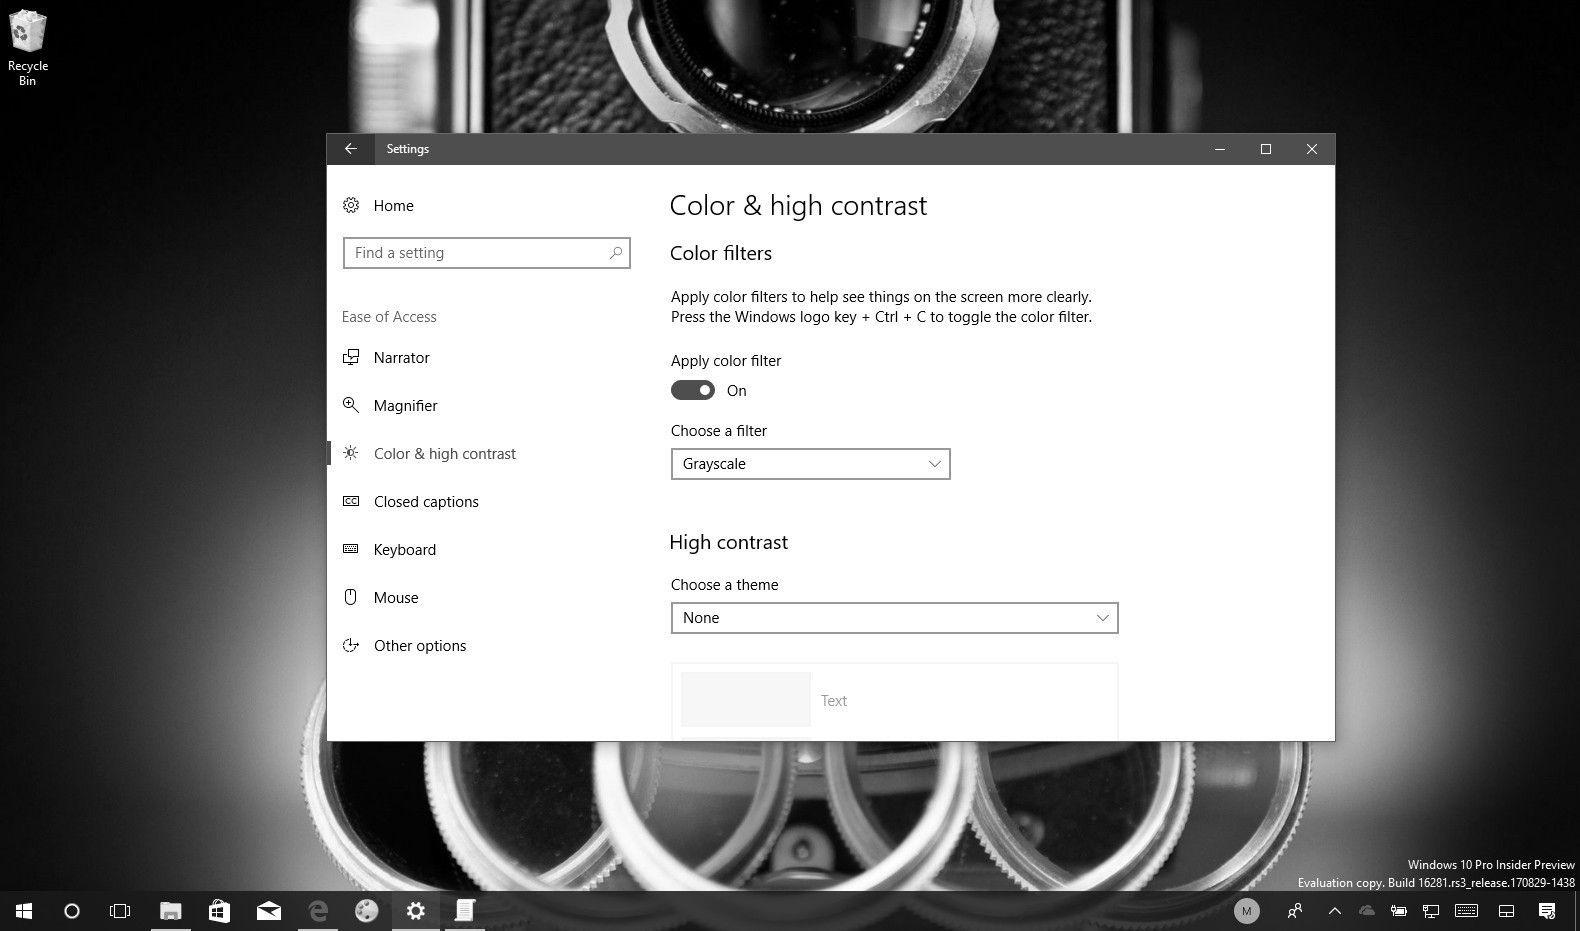 Black and White Windows Logo - How to enable color filters in the Windows 10 Fall Creators Update